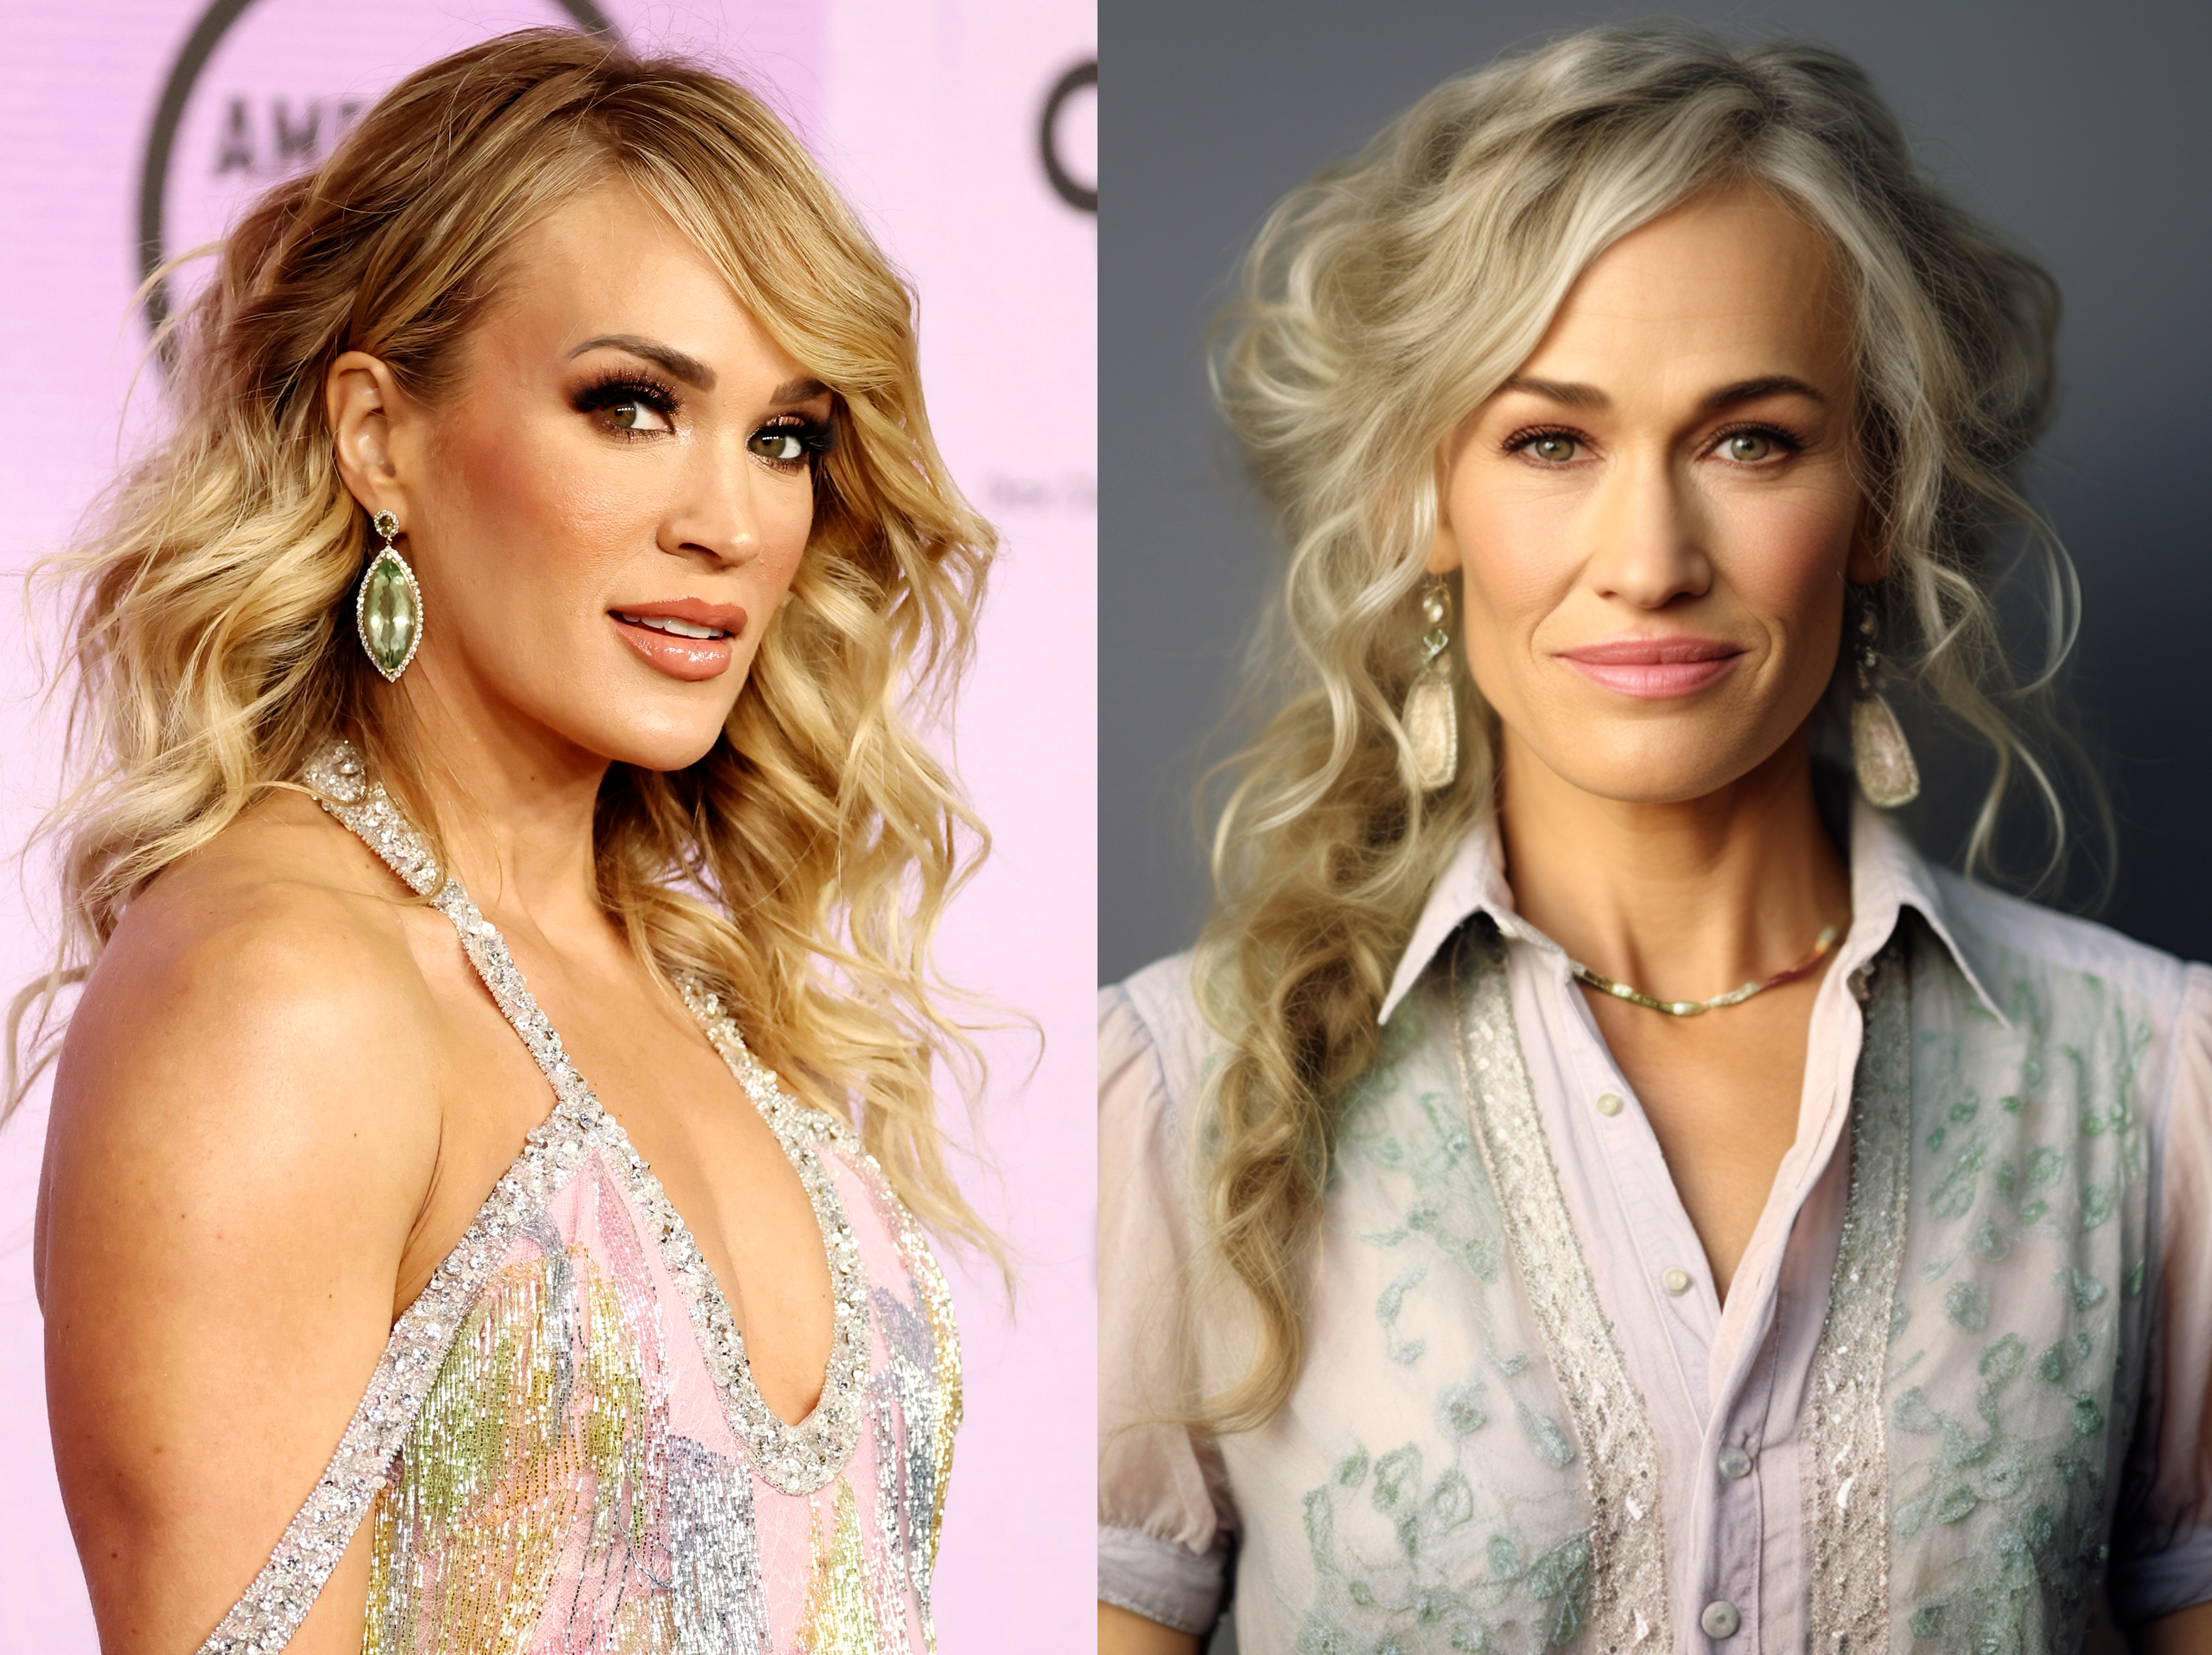 Carrie Underwood at the American Music Awards in Los Angeles, California on November 20, 2022 | How Carrie Underwood might look at 70 via AI | Sources: Getty Images | Midjourney